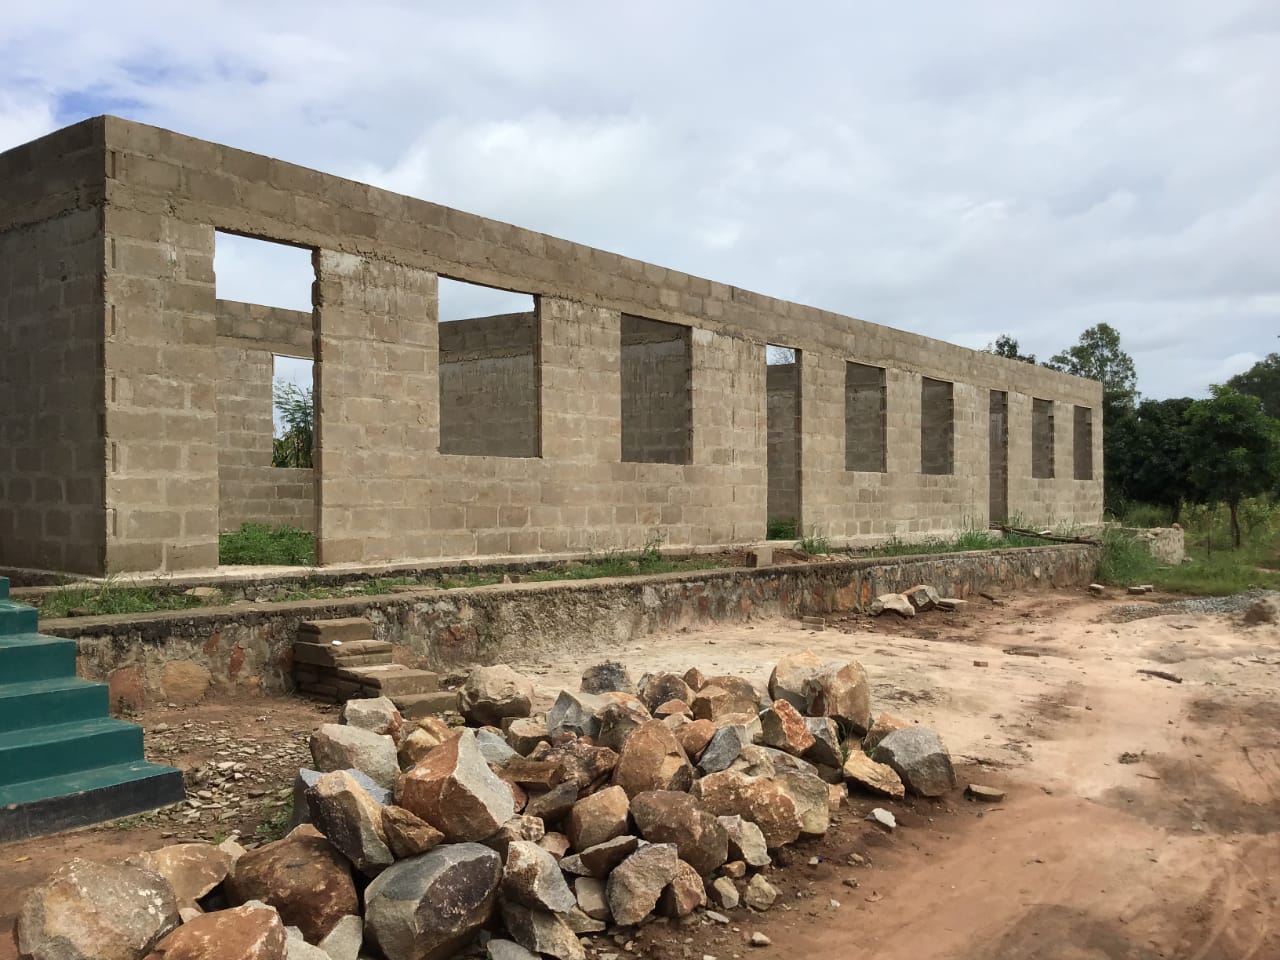 Work on the new classroom block has reached eaves height